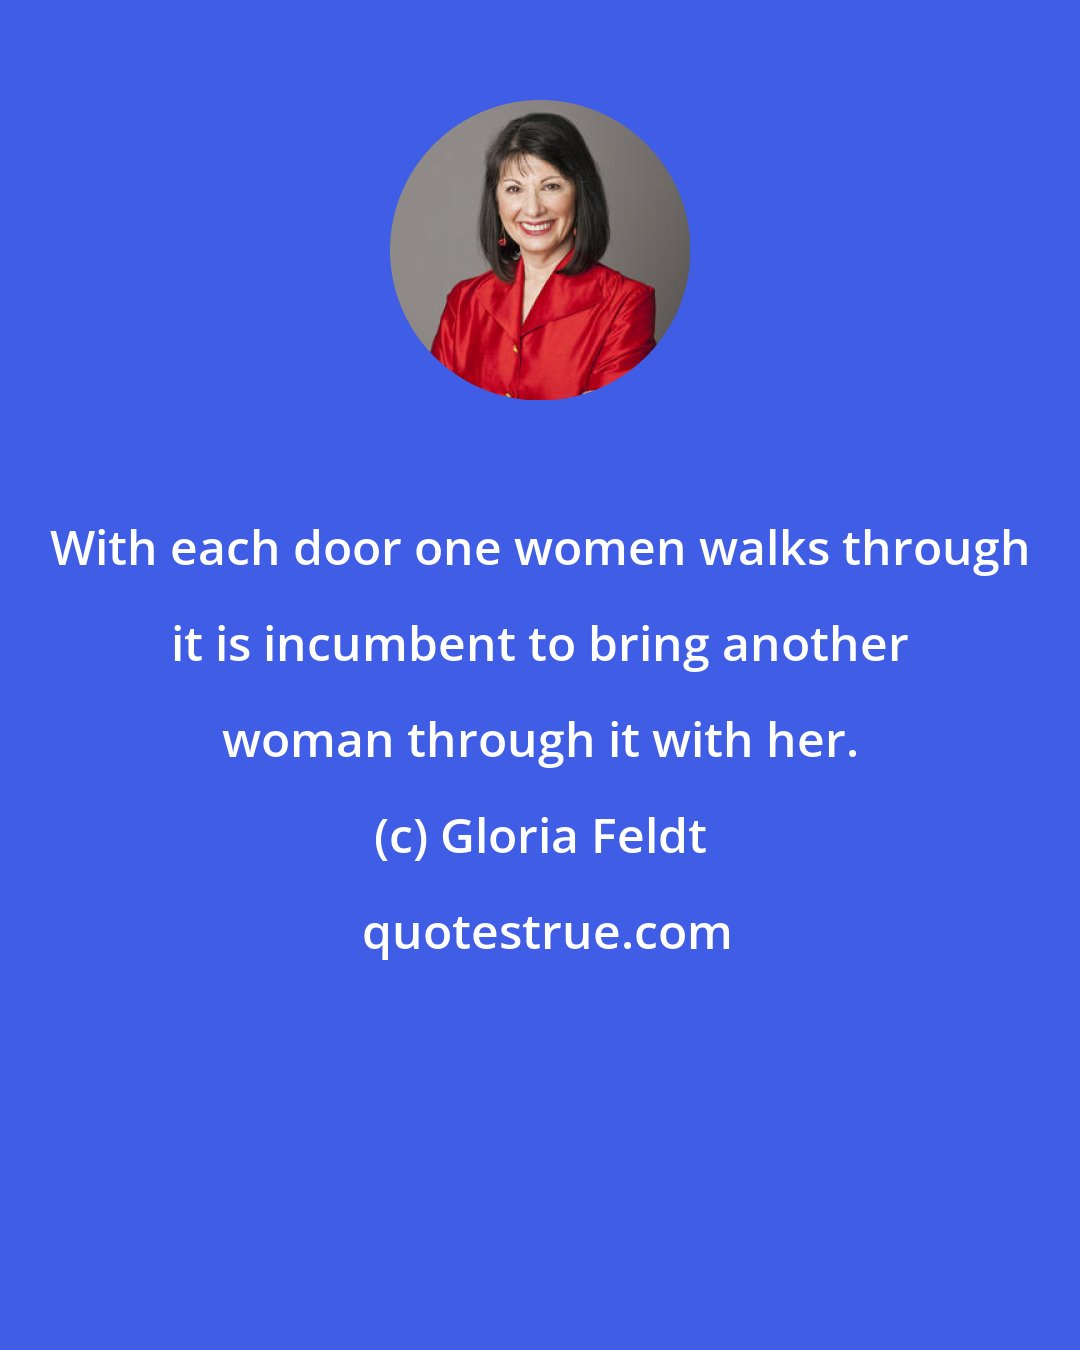 Gloria Feldt: With each door one women walks through it is incumbent to bring another woman through it with her.